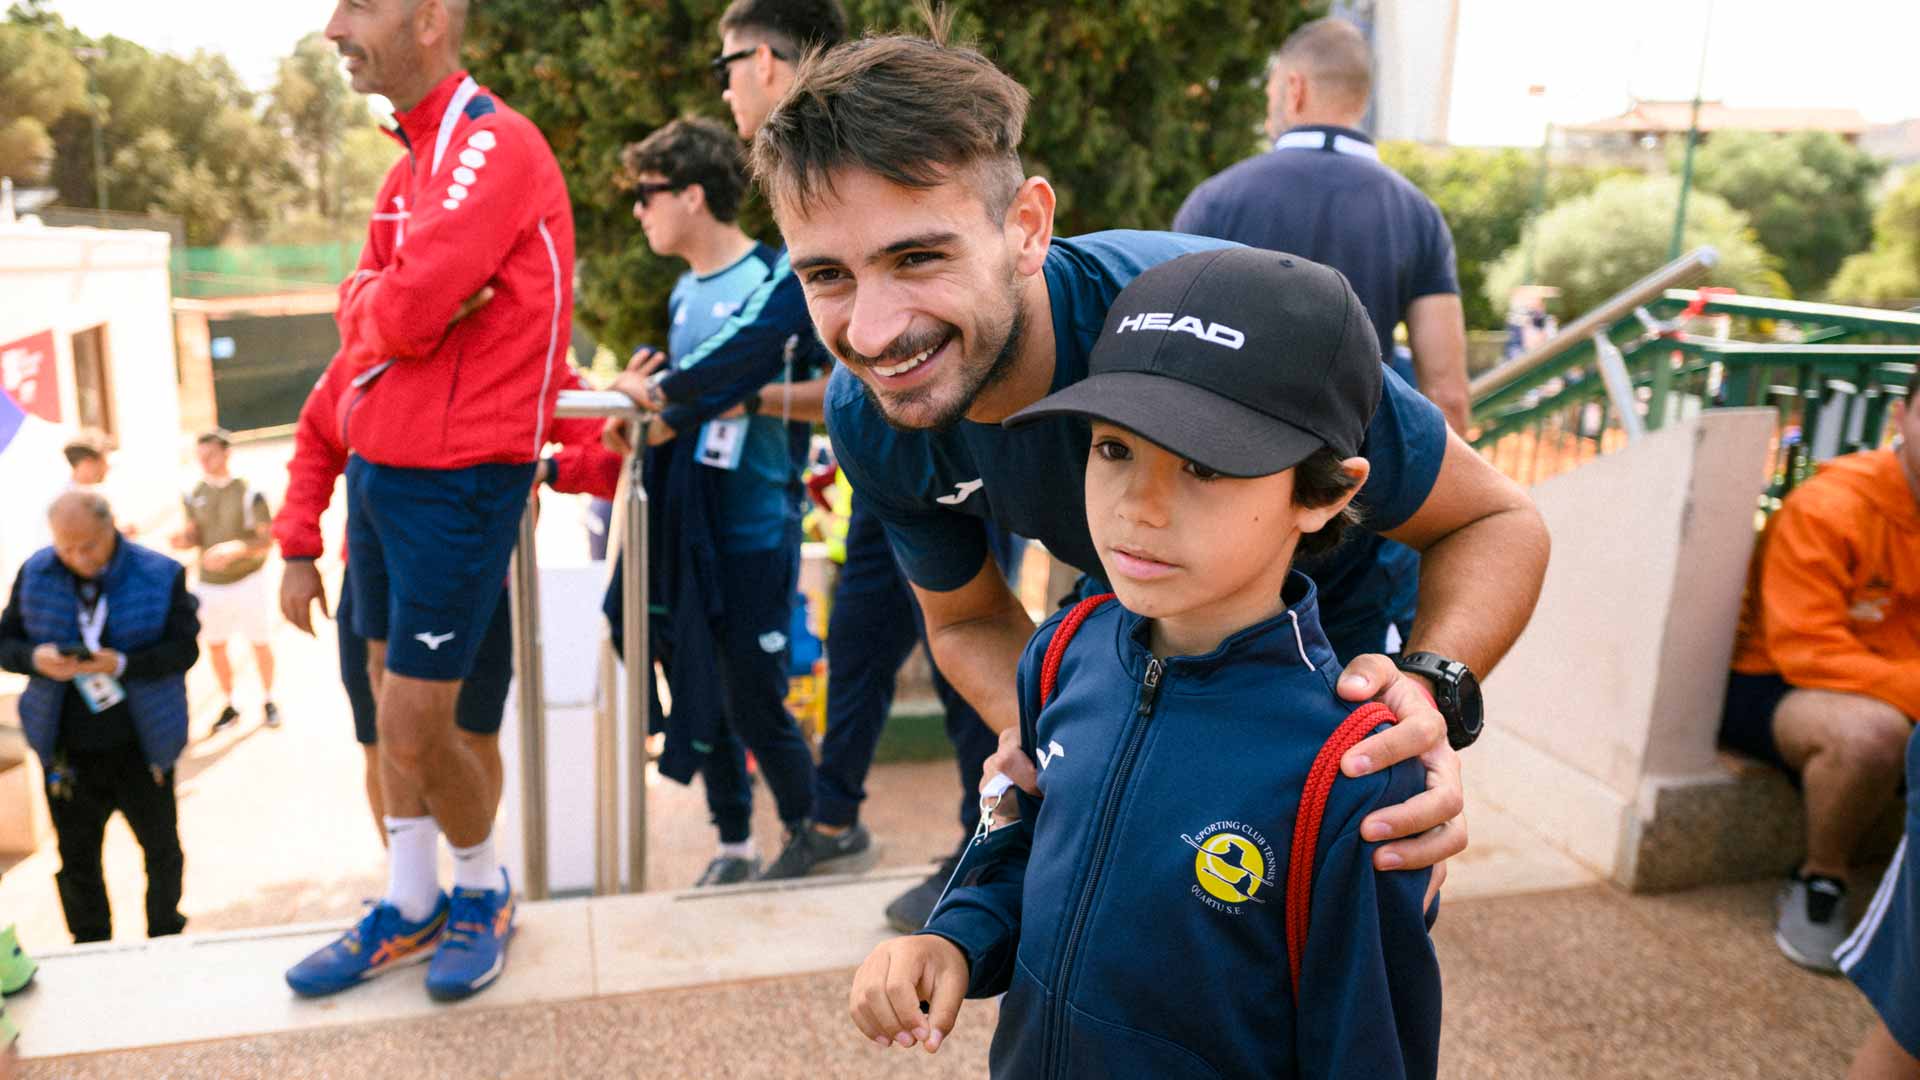 Mariano Navone greets a fan at the Cagliari Challenger.